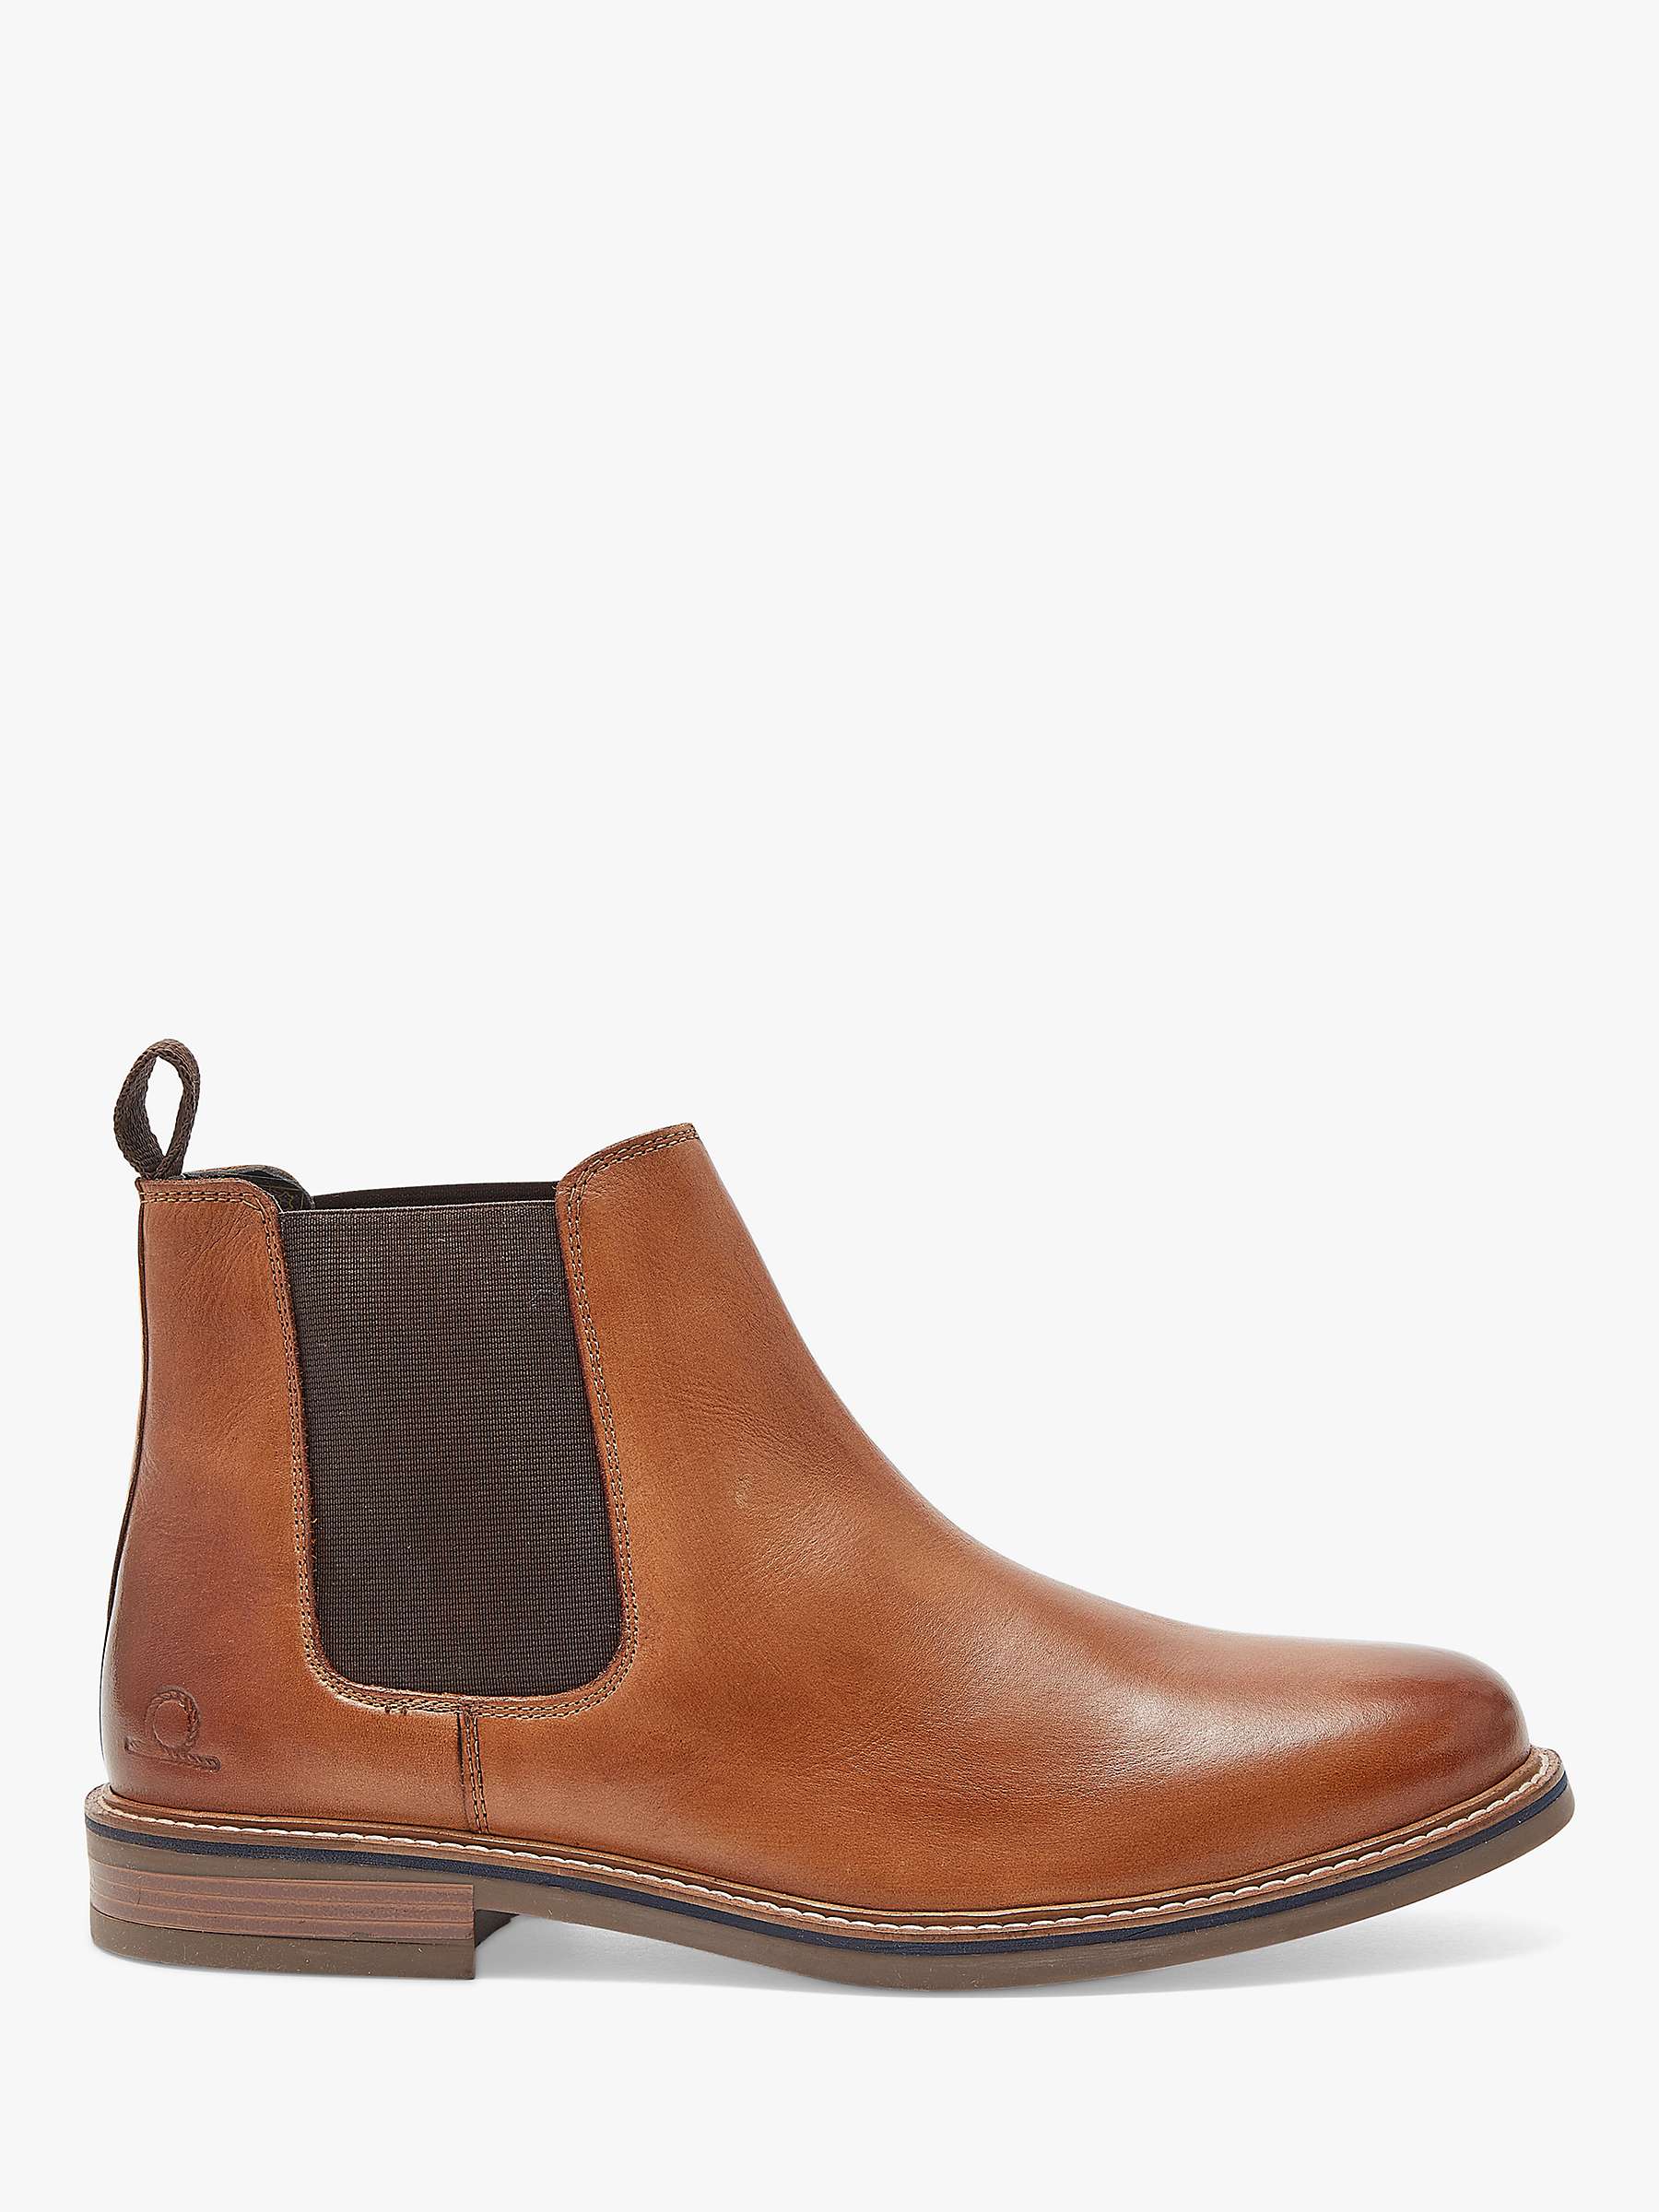 Buy Chatham Scaffell Leather Chukka Boots, Tan Online at johnlewis.com